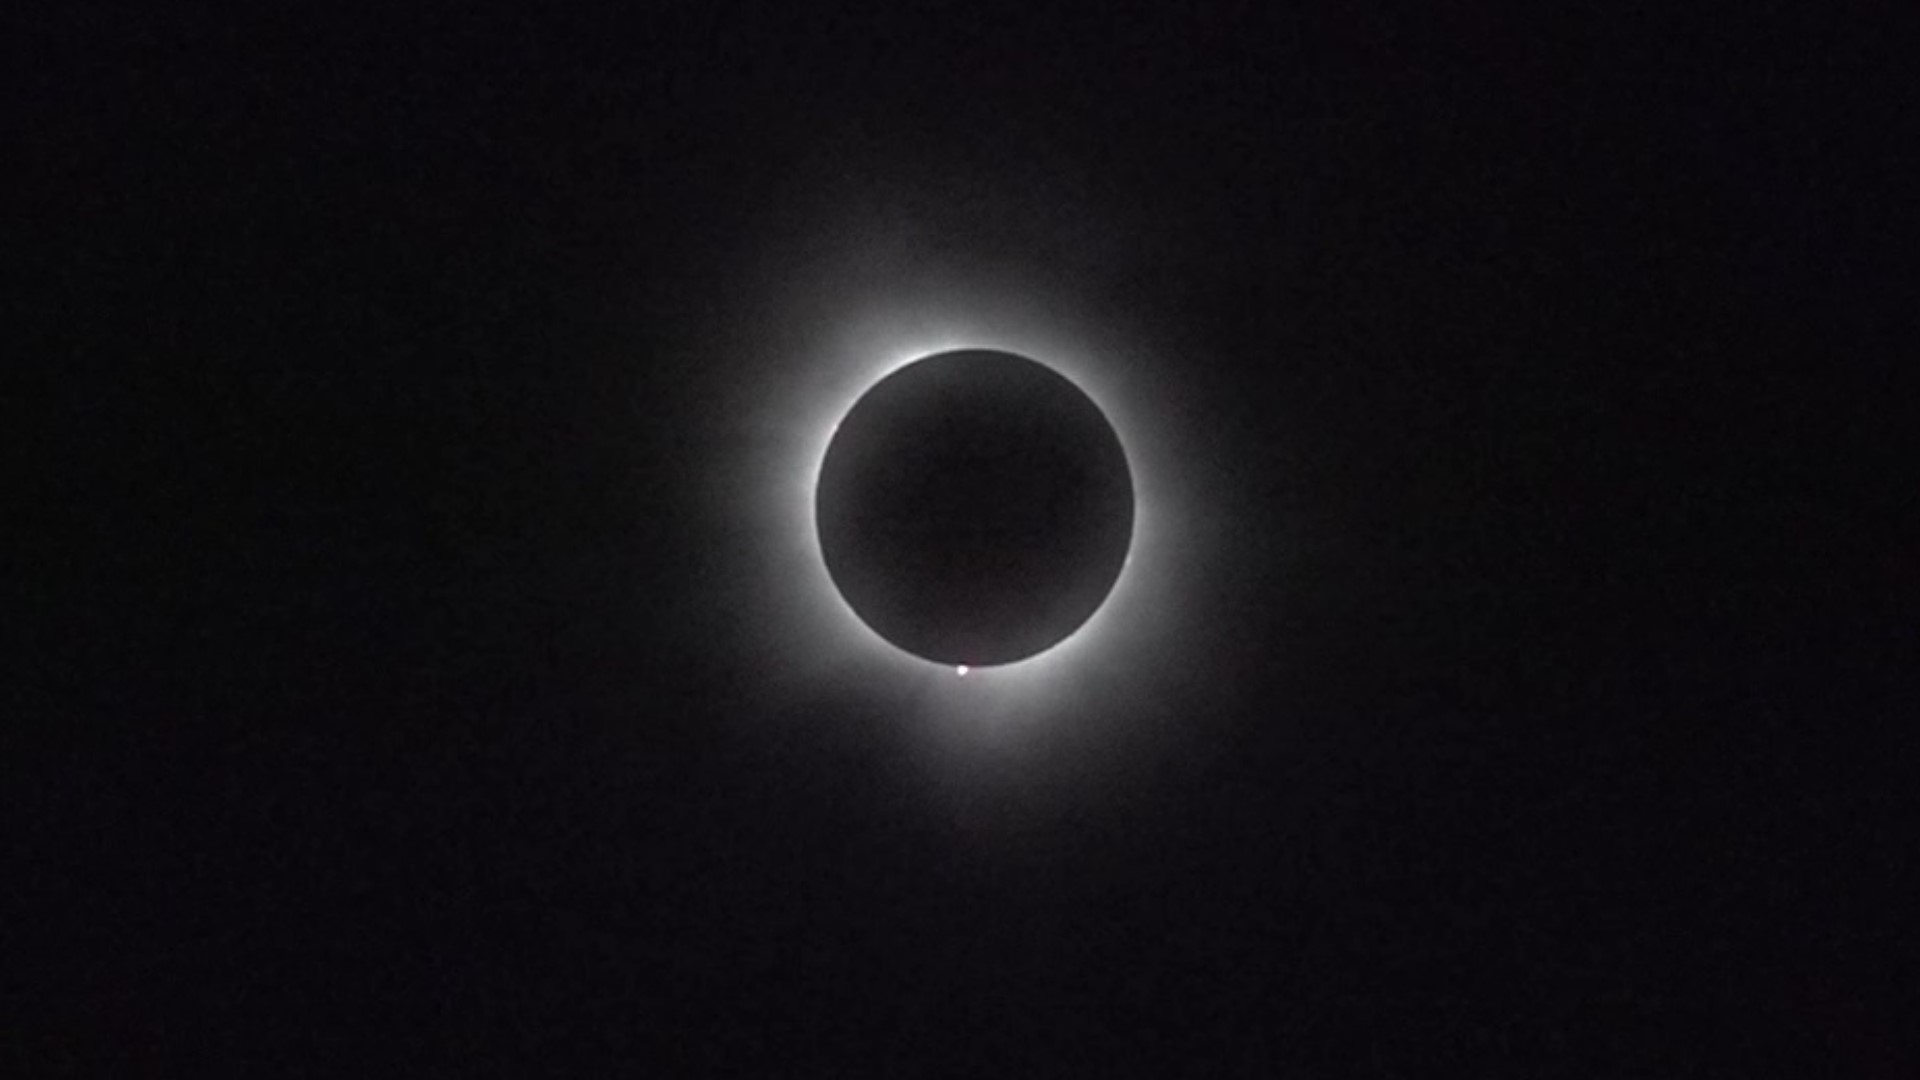 Newswatch 16's Nikki Krize was in the path of totality on Monday as the solar eclipse happened.